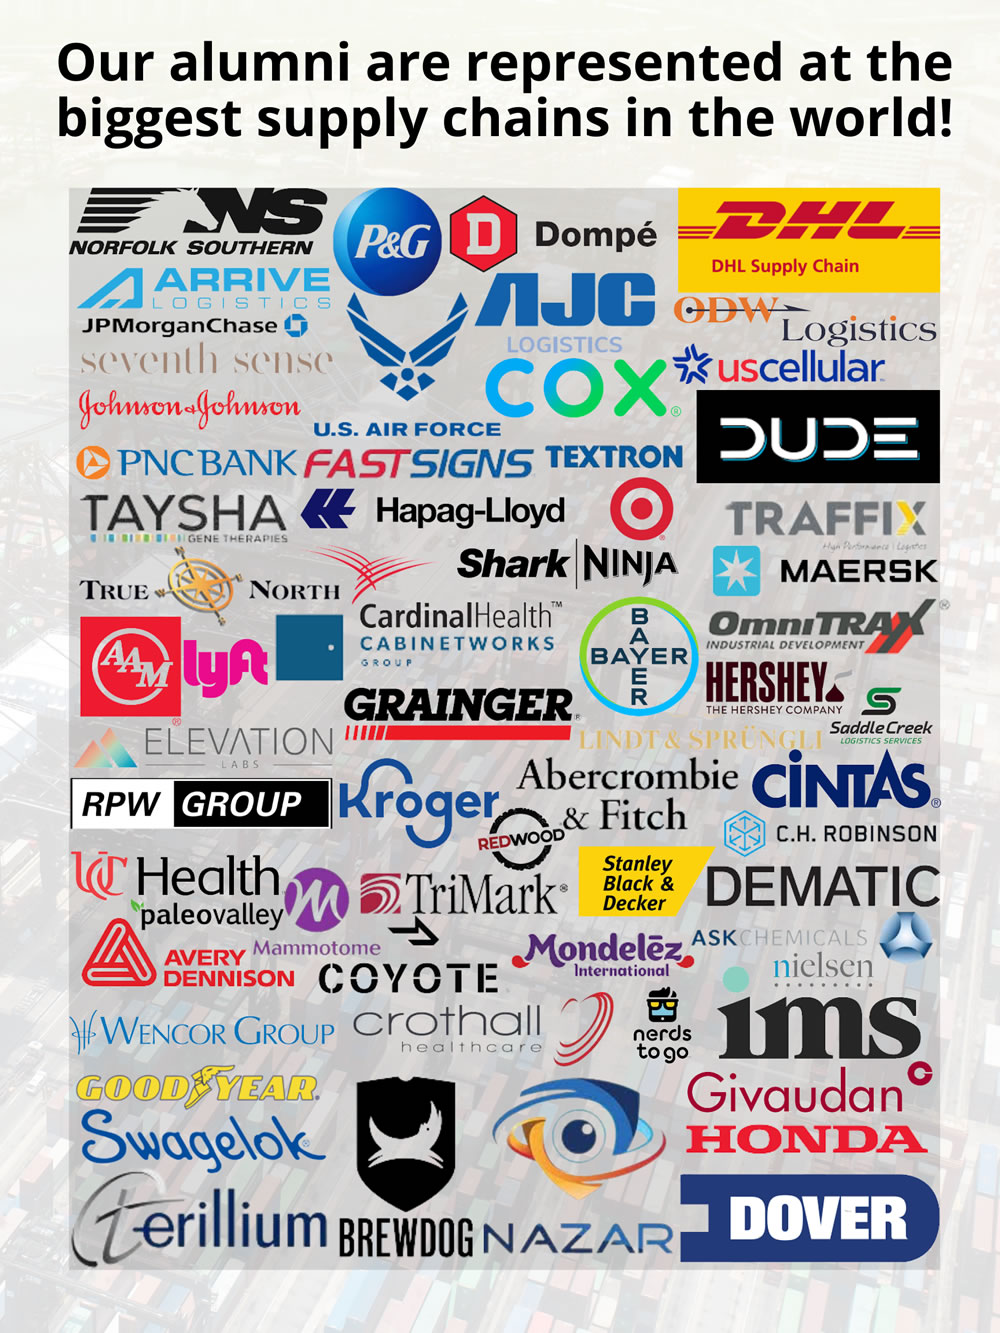 Our alumni are represented at the biggest supply chains in the world! Graphic with about 50 company logos including companies in logistics, manufacturing, telecommunications, pharmaceuticals, and consumer product industries.